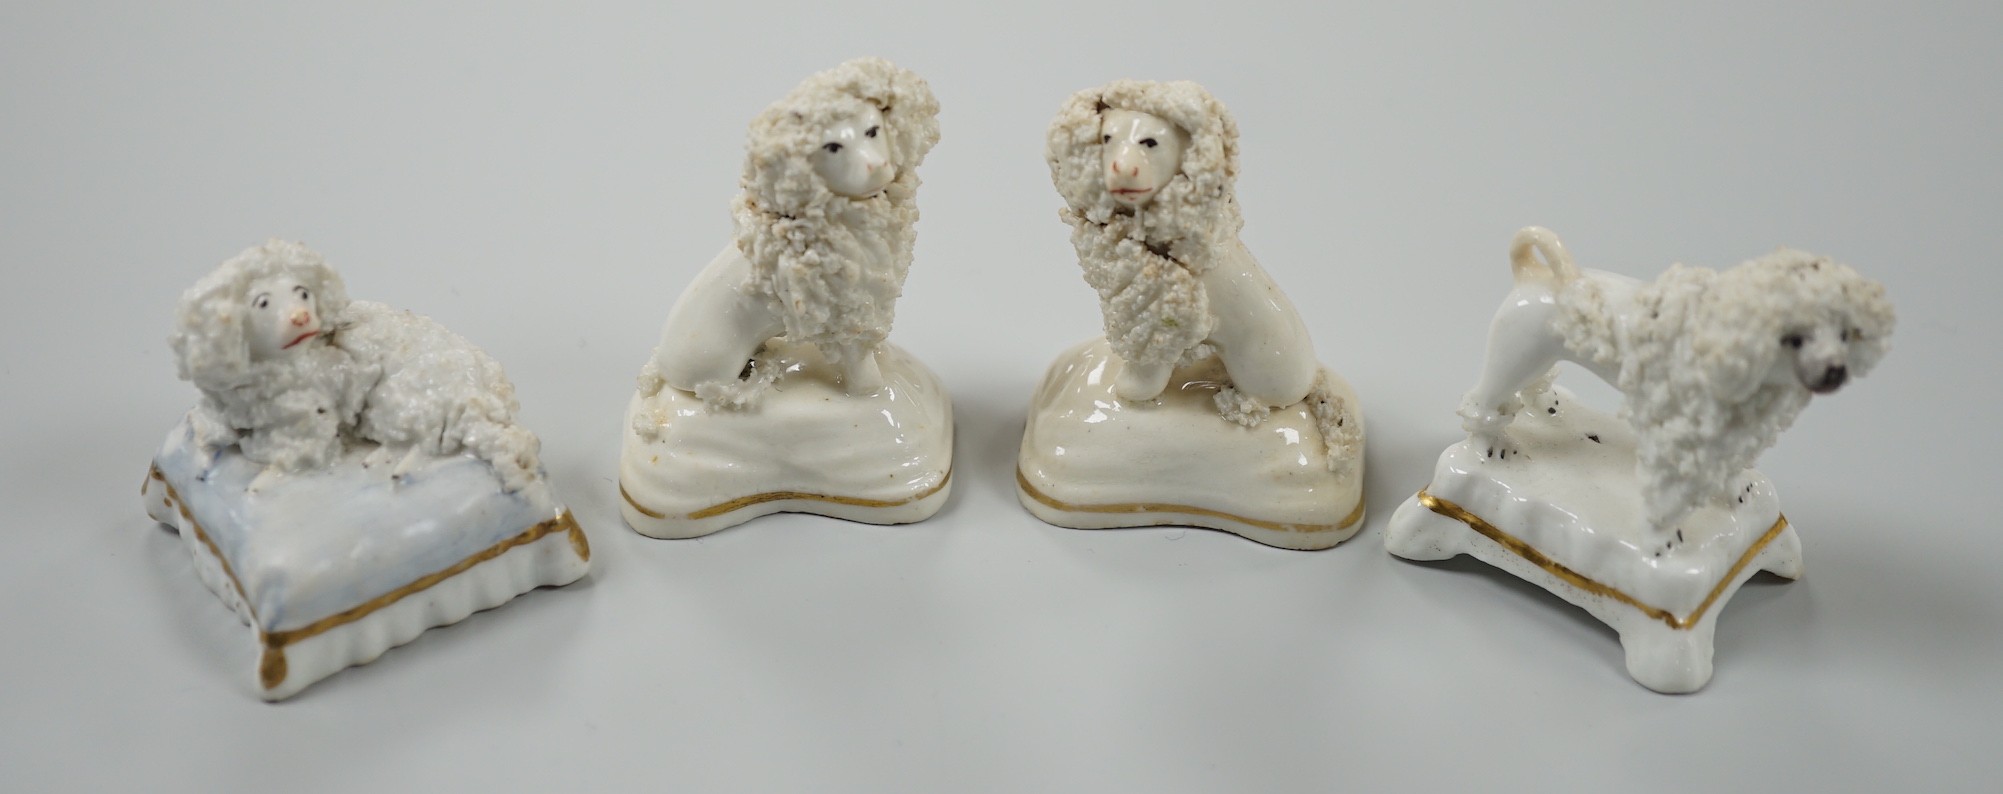 Four toy Staffordshire models of poodles, to include a pair, c.1830-50, (4). Tallest 5cm, Provence: Dennis G. Rice collection, Cf. Dennis G.Rice Dogs in English porcelain, colour plate 113